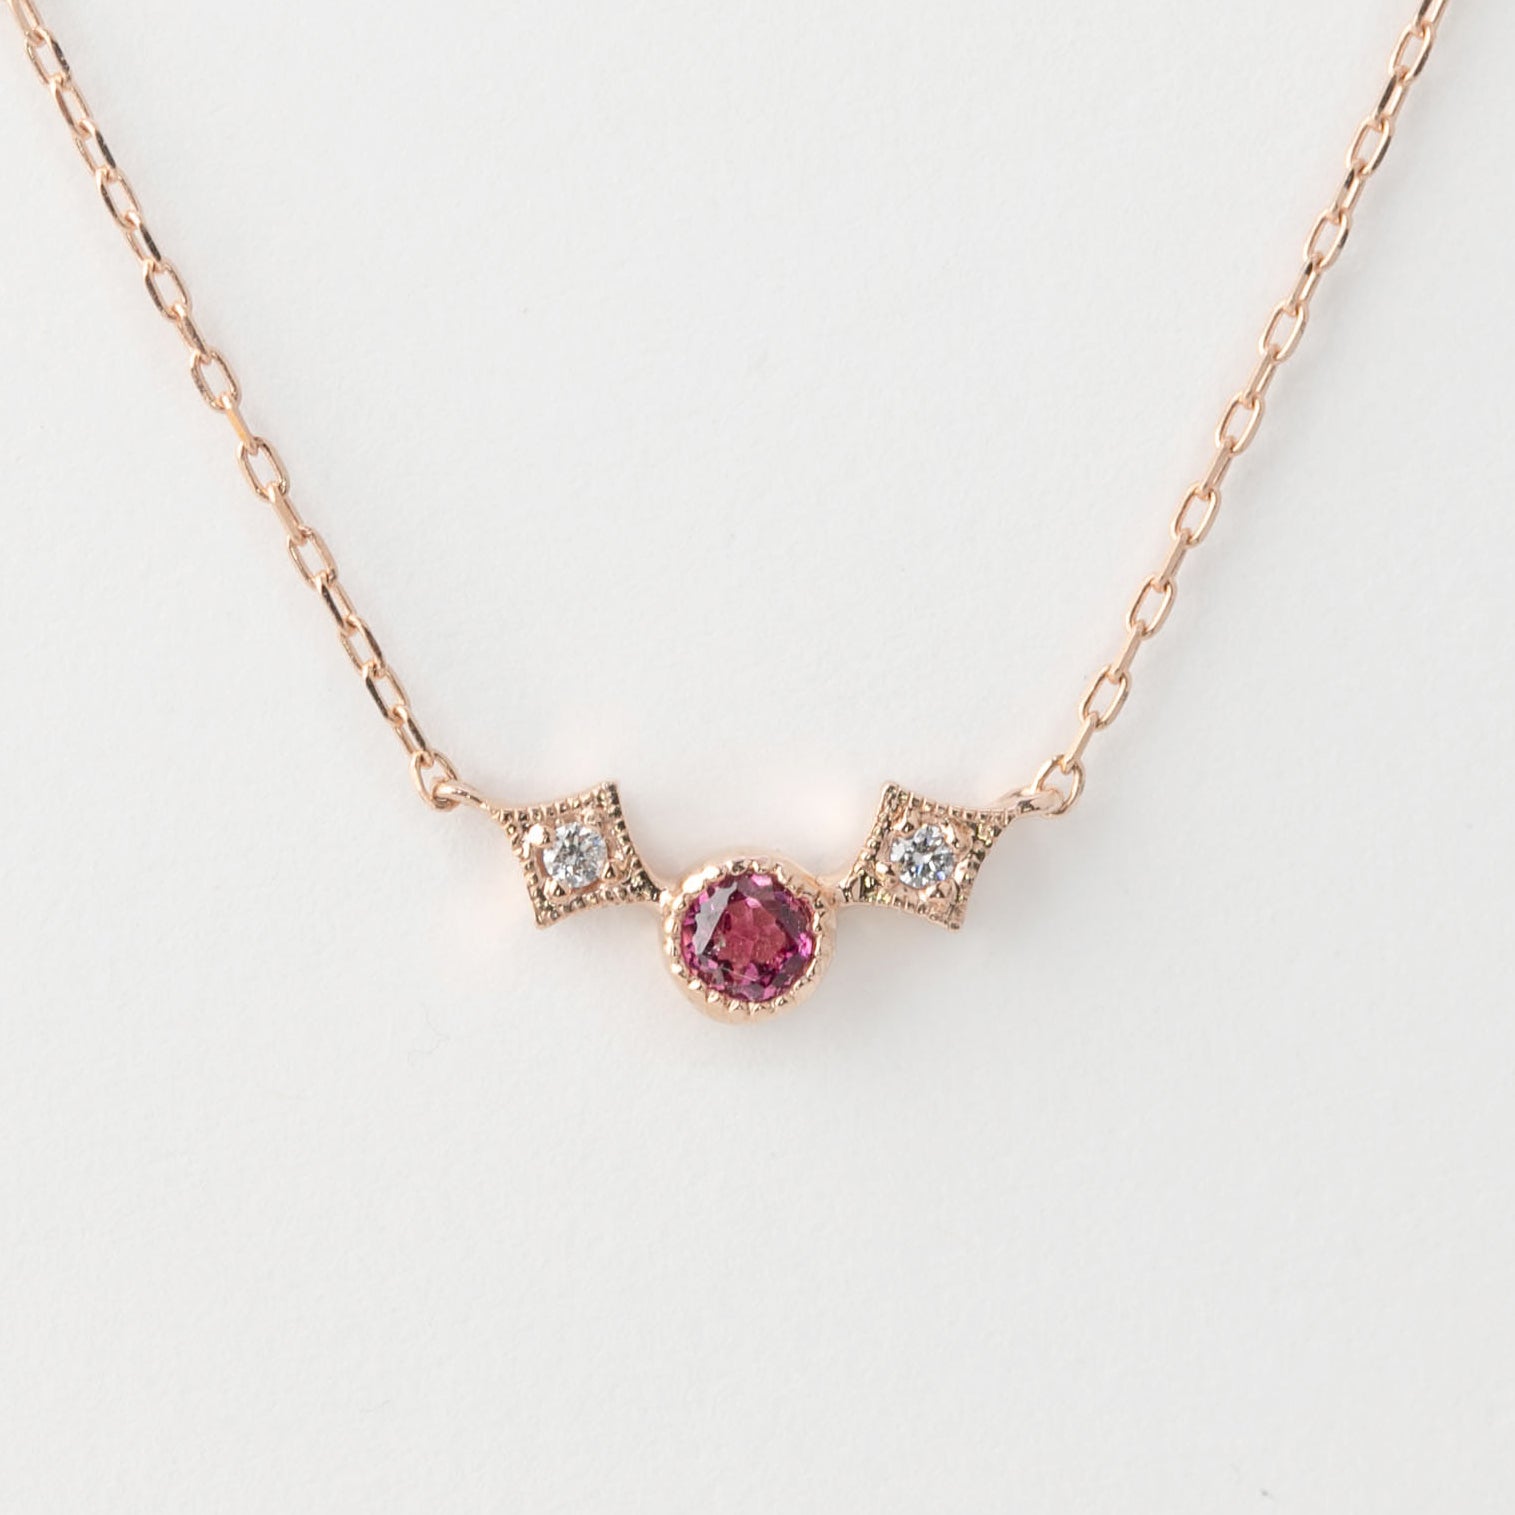 Pink Opal & Diamond Flora Necklace – YI COLLECTION